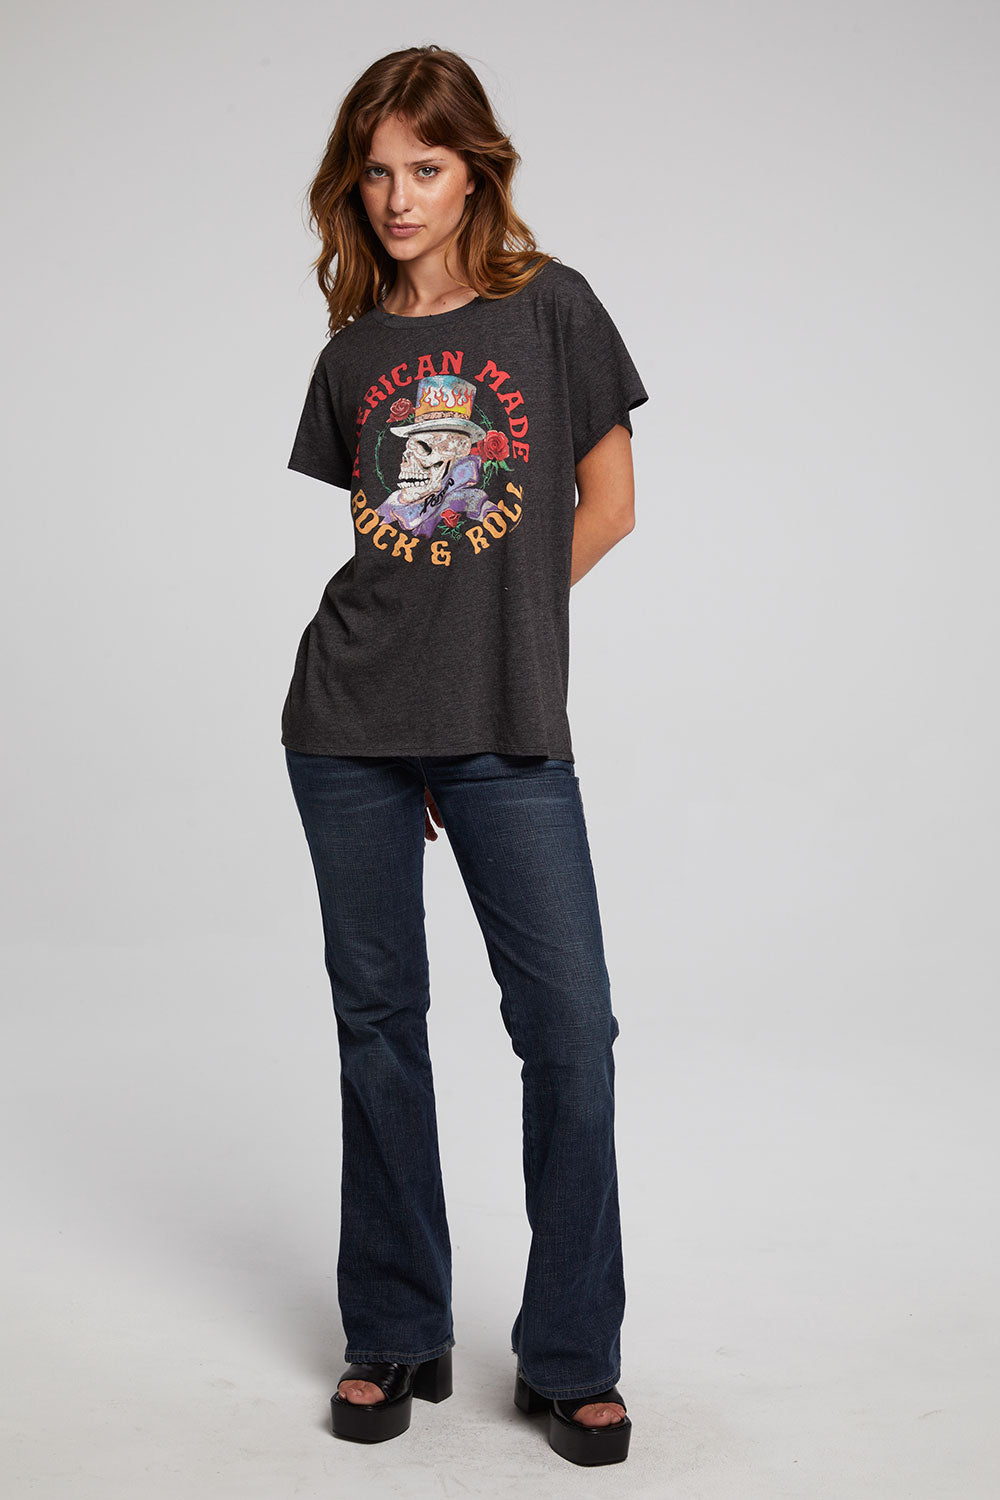 Poison American Made Rock & Roll Tee WOMENS chaserbrand